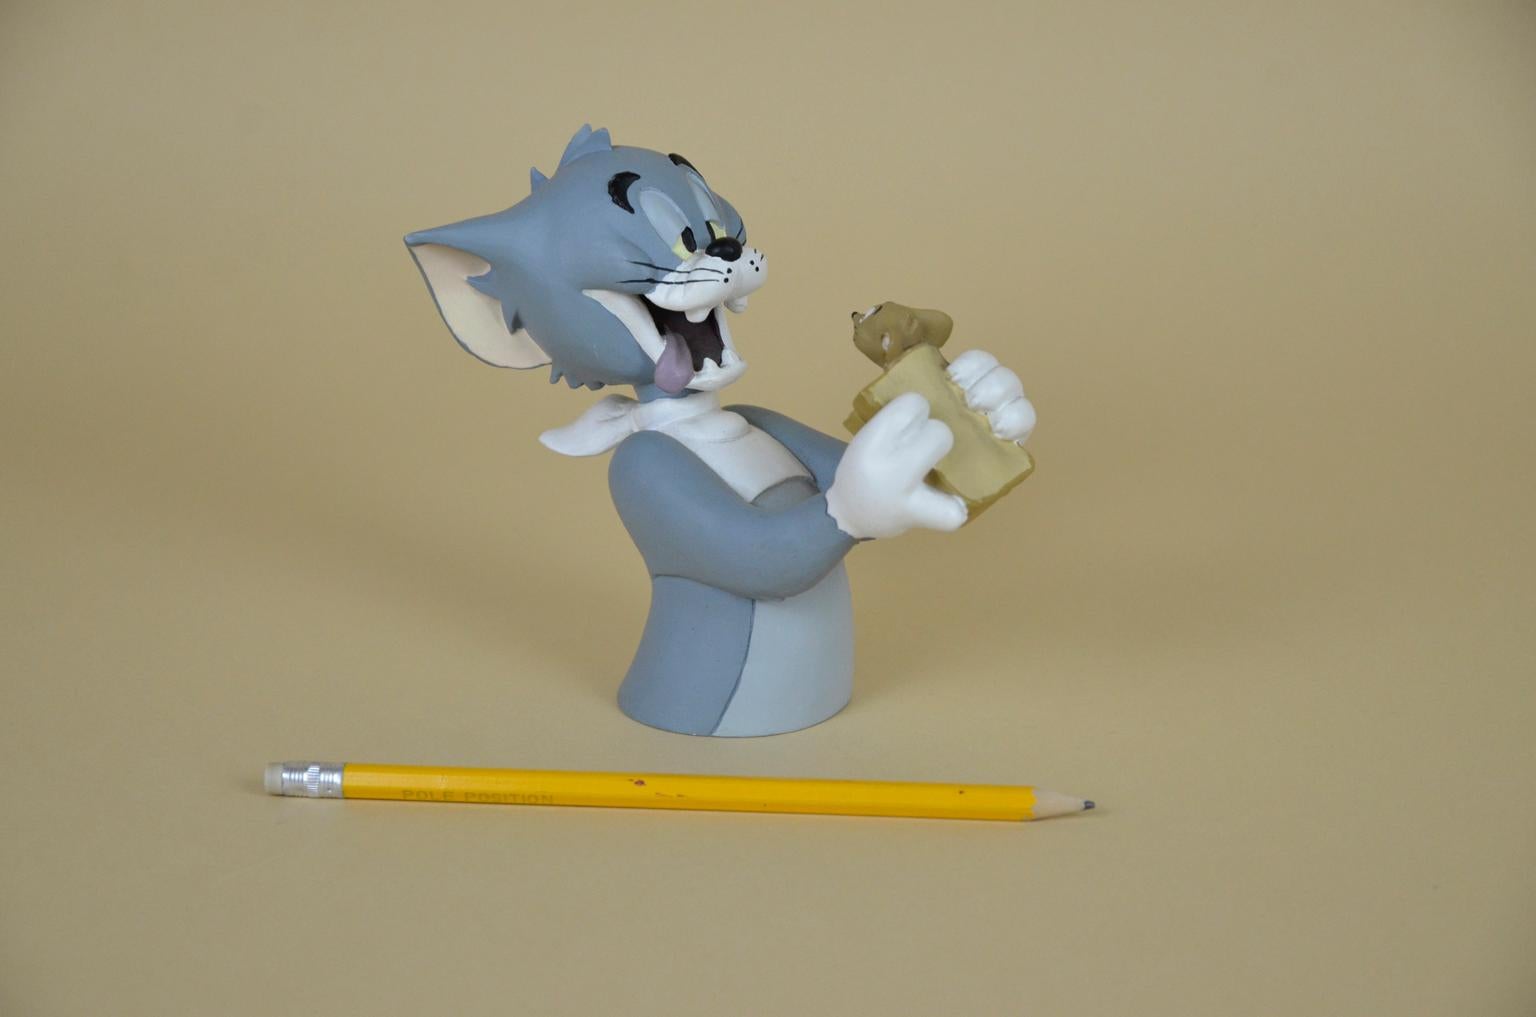 Tom and Jerry - Tom eats Jerry in a sandwich hand painted statuette by French company Demons & Merveilles for Hanna-Barbera realized in resin in the 1997.

The statue doesn't have the original box.